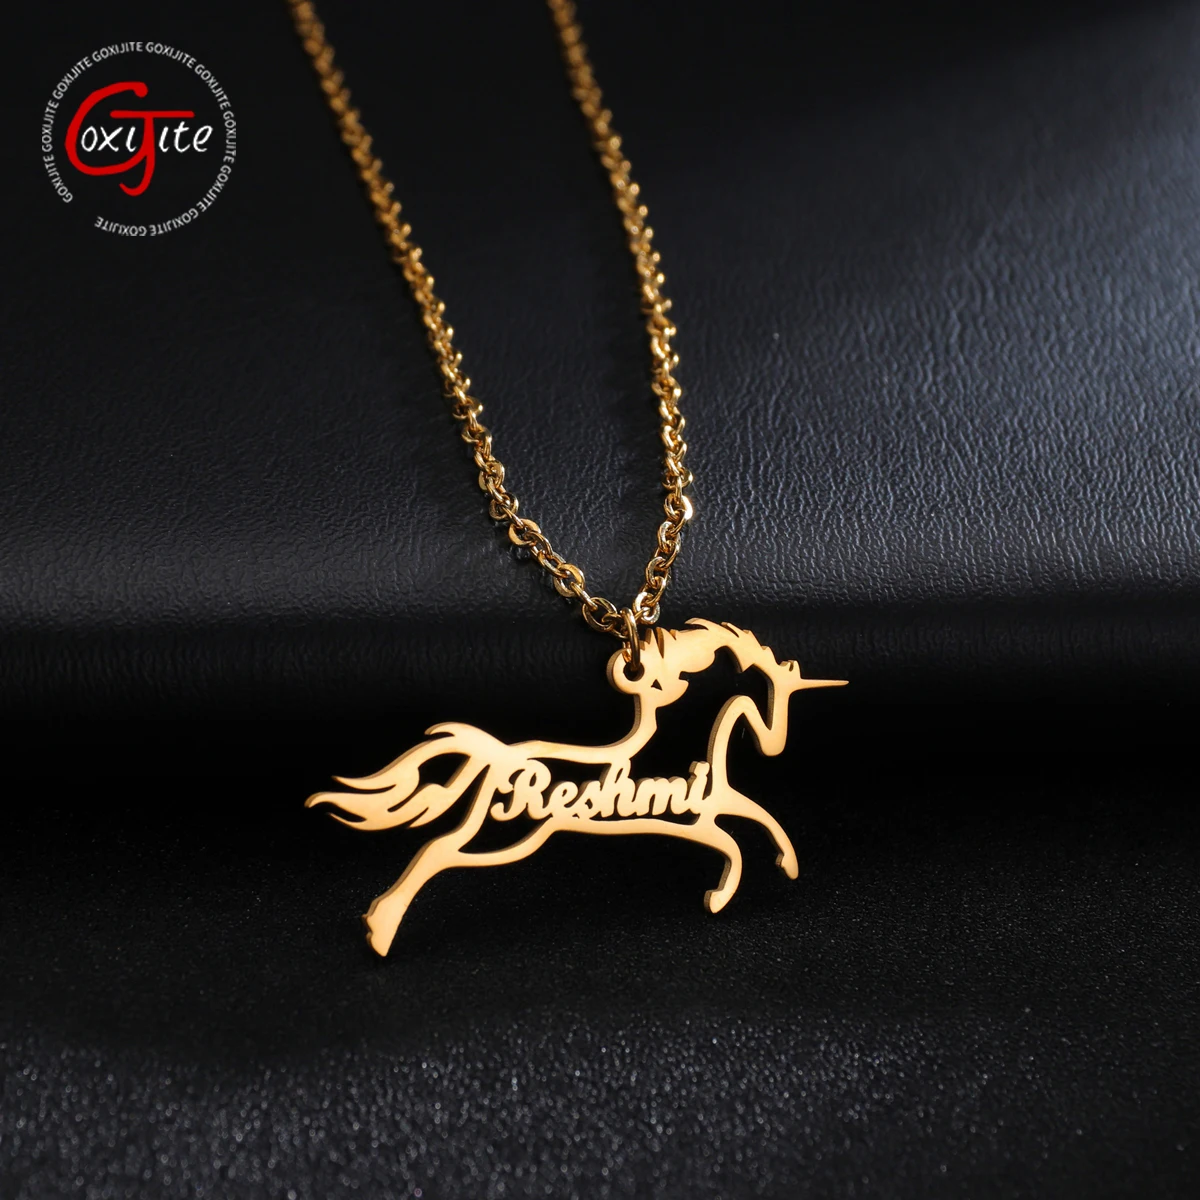 Goxijite Personalized Hollow Unicorn Name Necklace For Girls Zodiac Horse Stainless Steel Custom Nameplate Necklaces Lovely Gift 9pcs lot lovely plastic unicorn hair bands birthday supplies for kids girls headband with teeth hair hoop chic hair accessories